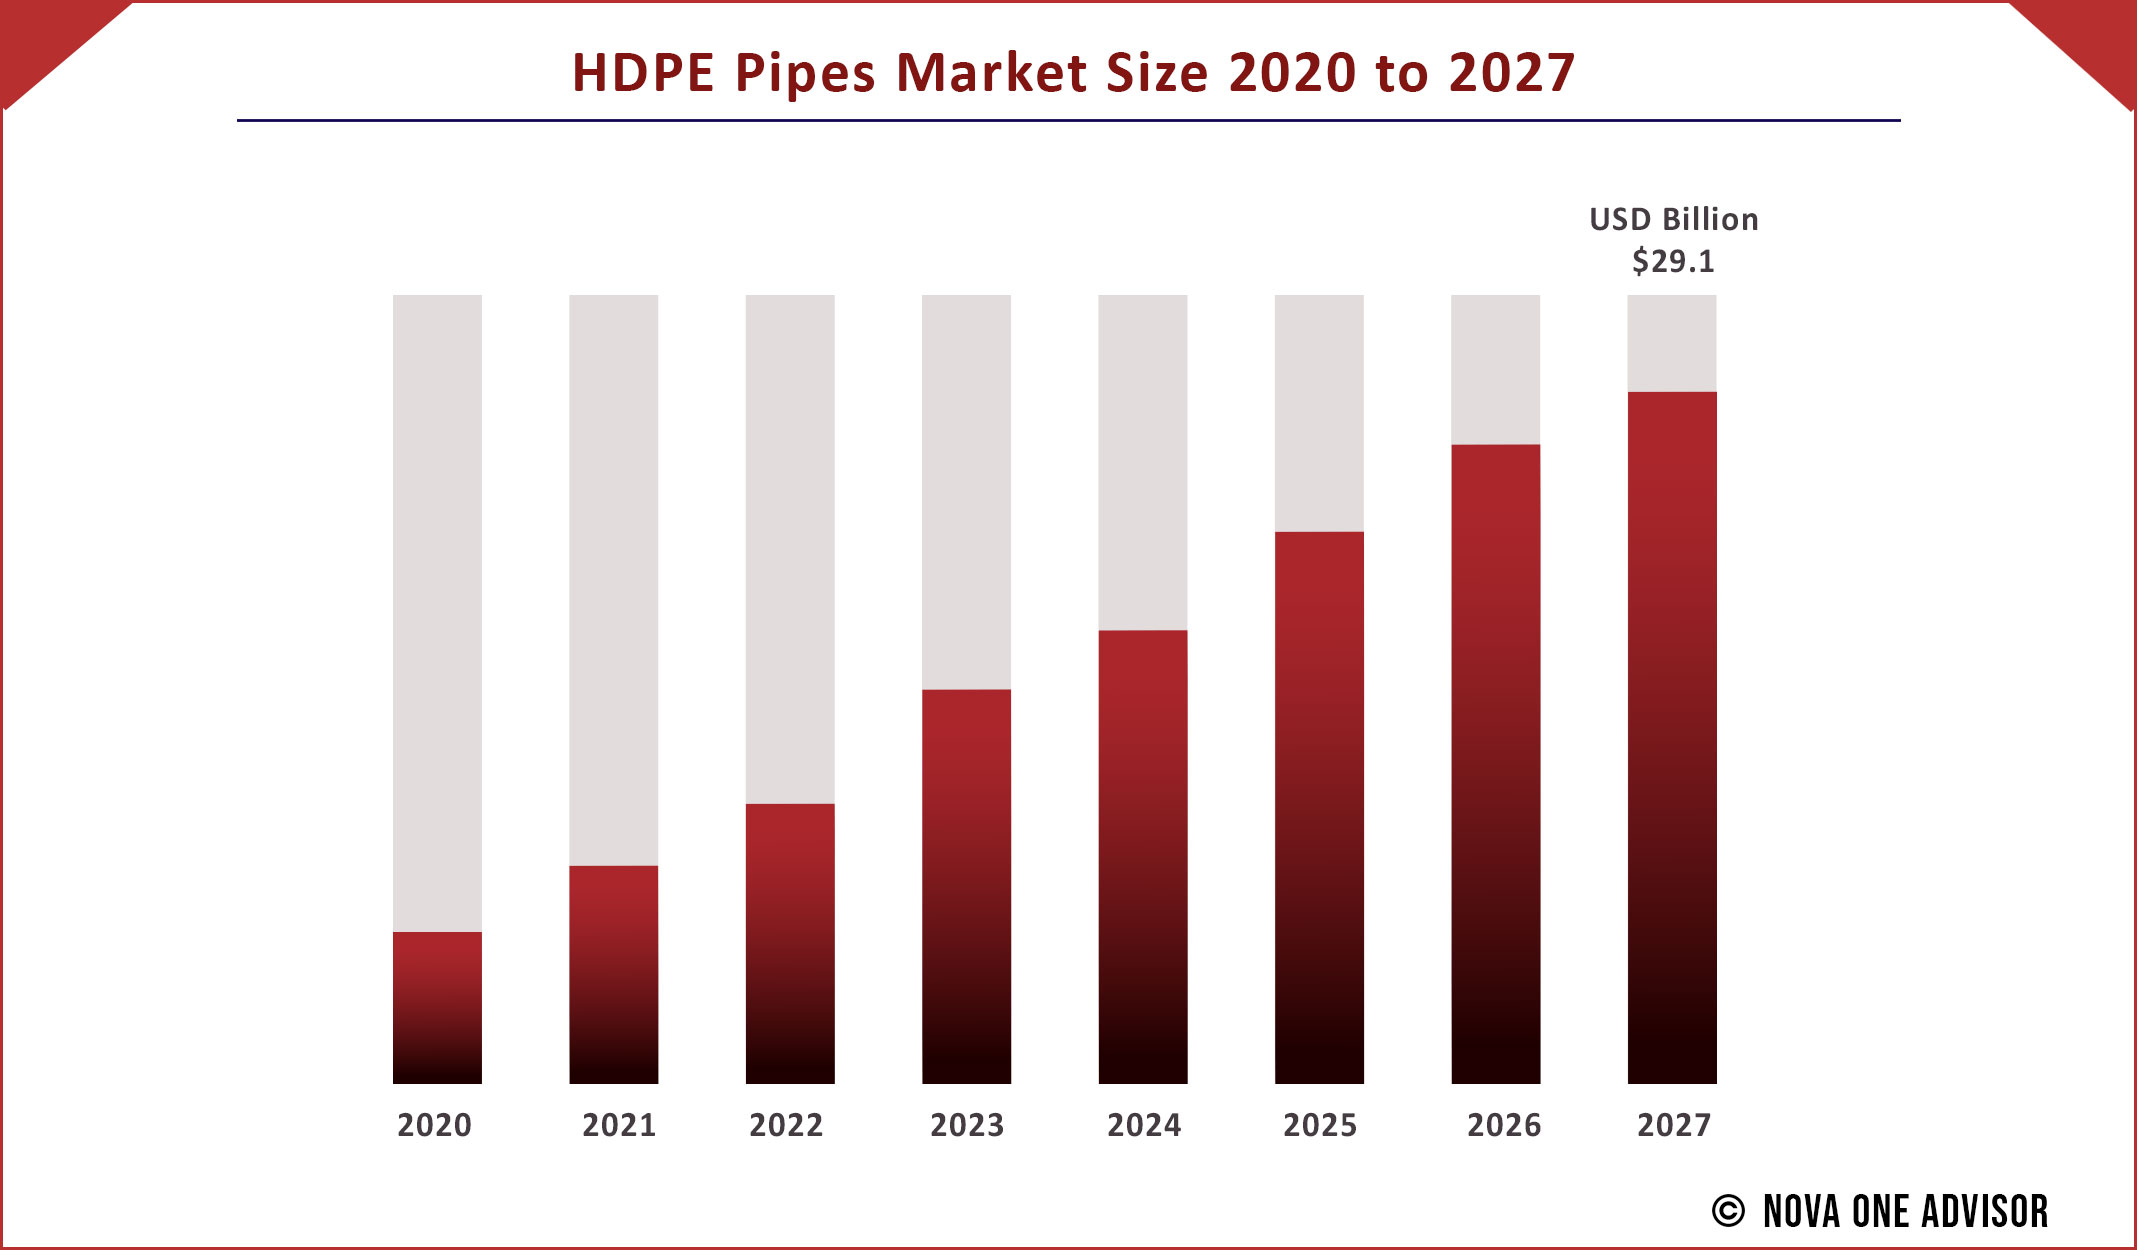 HDPE Pipes Market Size 2020 to 2027